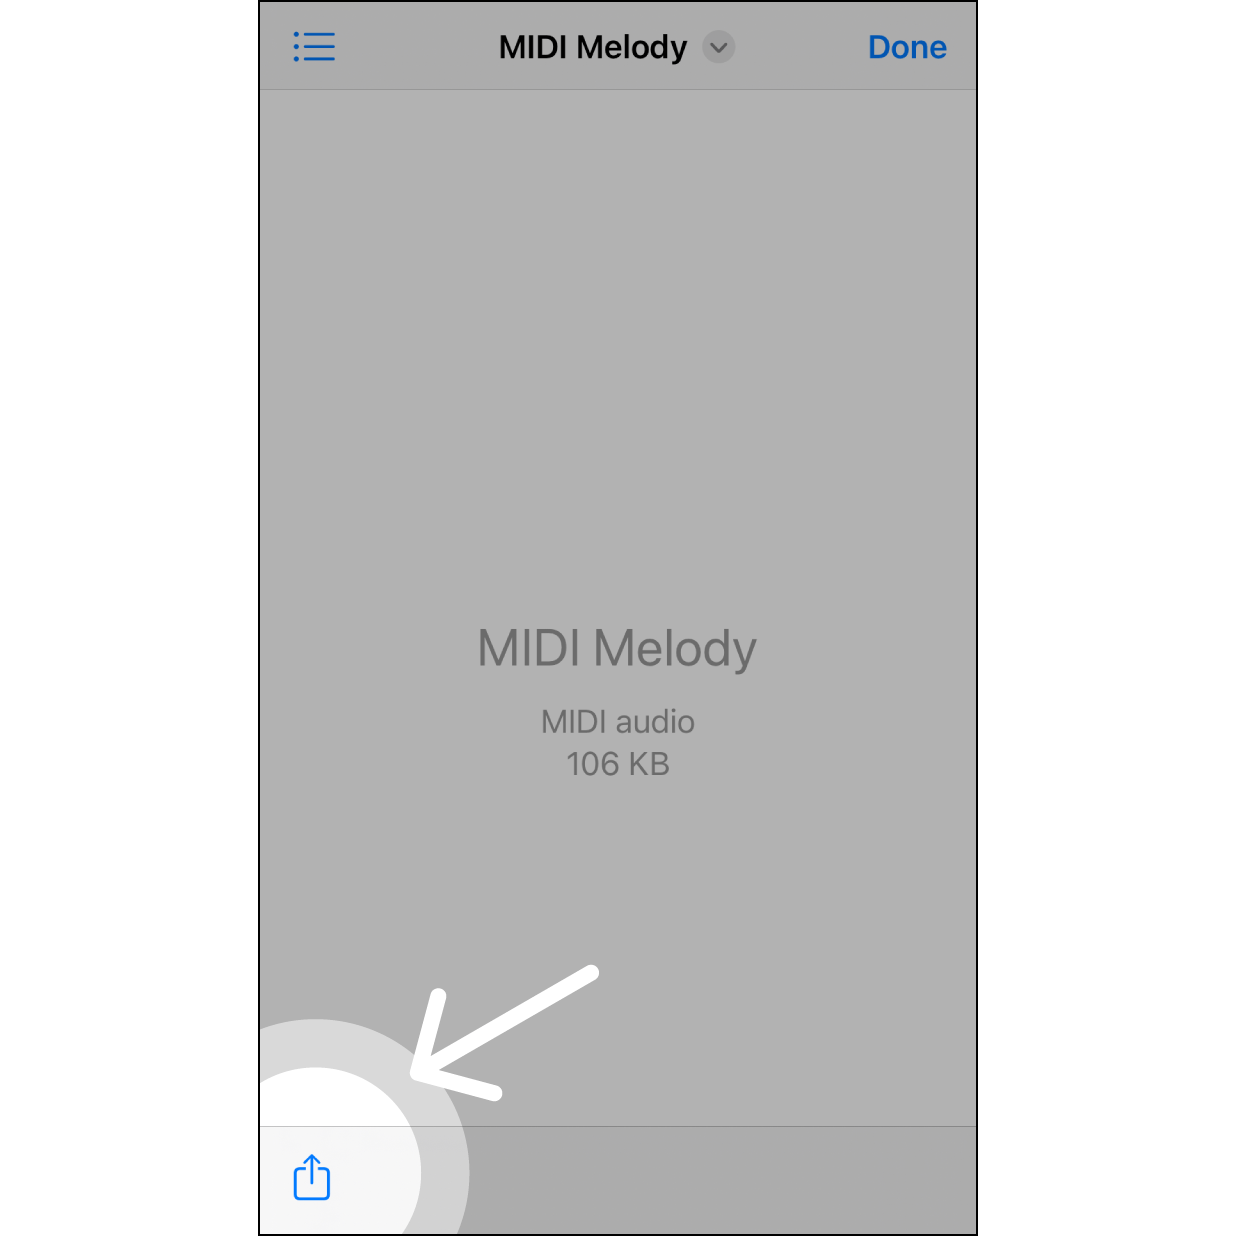 1. Goto “File” App to share Select the MIDI file in the “File” App, then click the “share” icon on the lower left-hand side